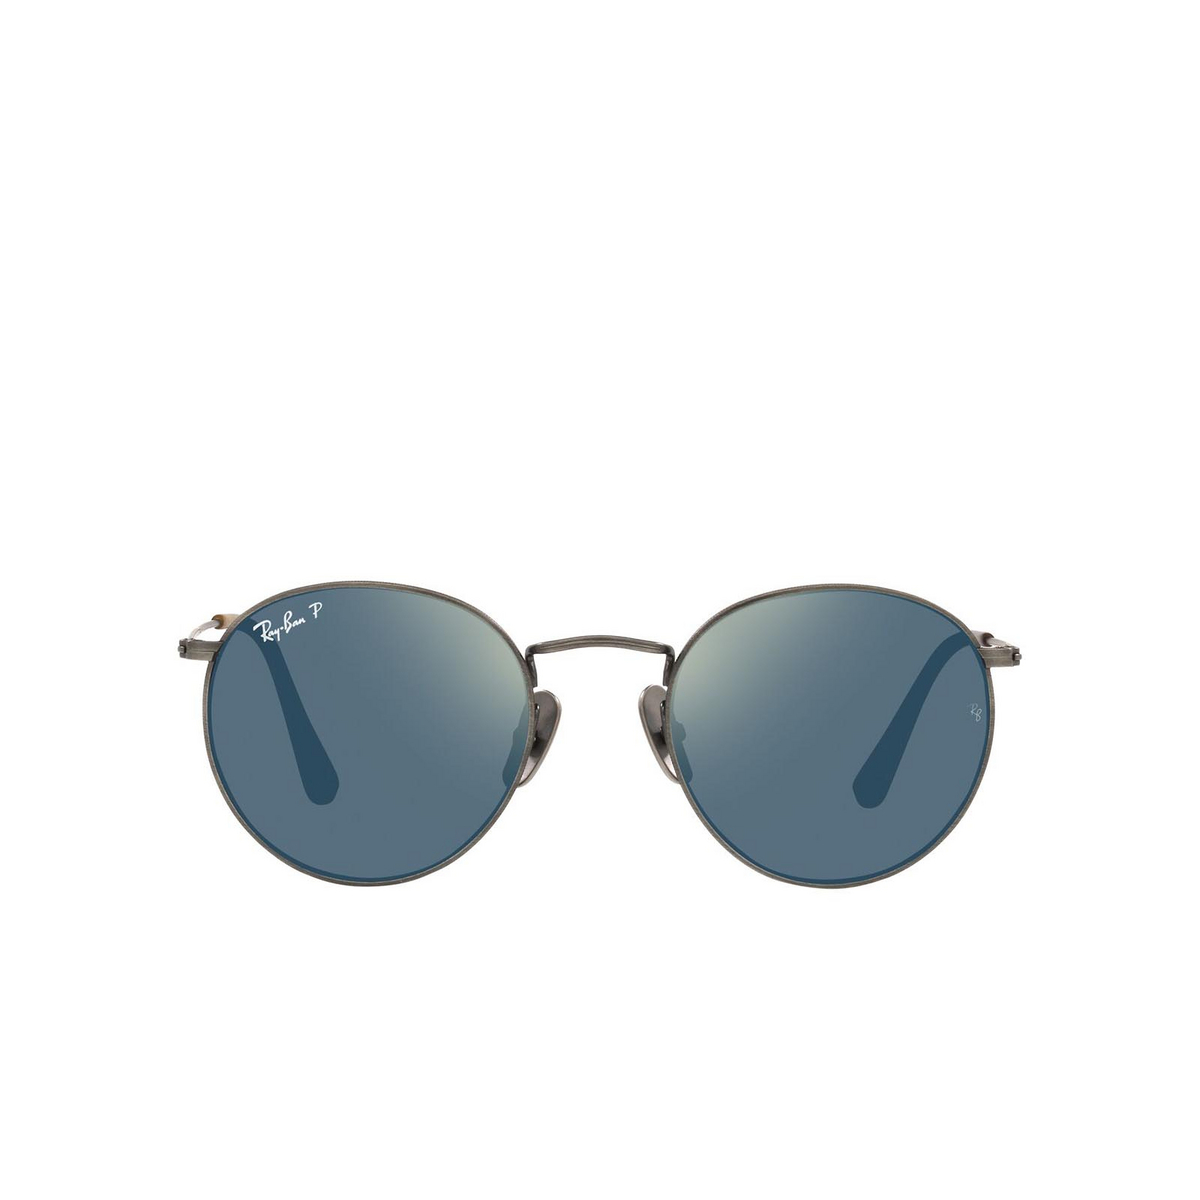 Occhiali da sole Ray-Ban RB8247 9208T0 Demigloss Petwer - frontale